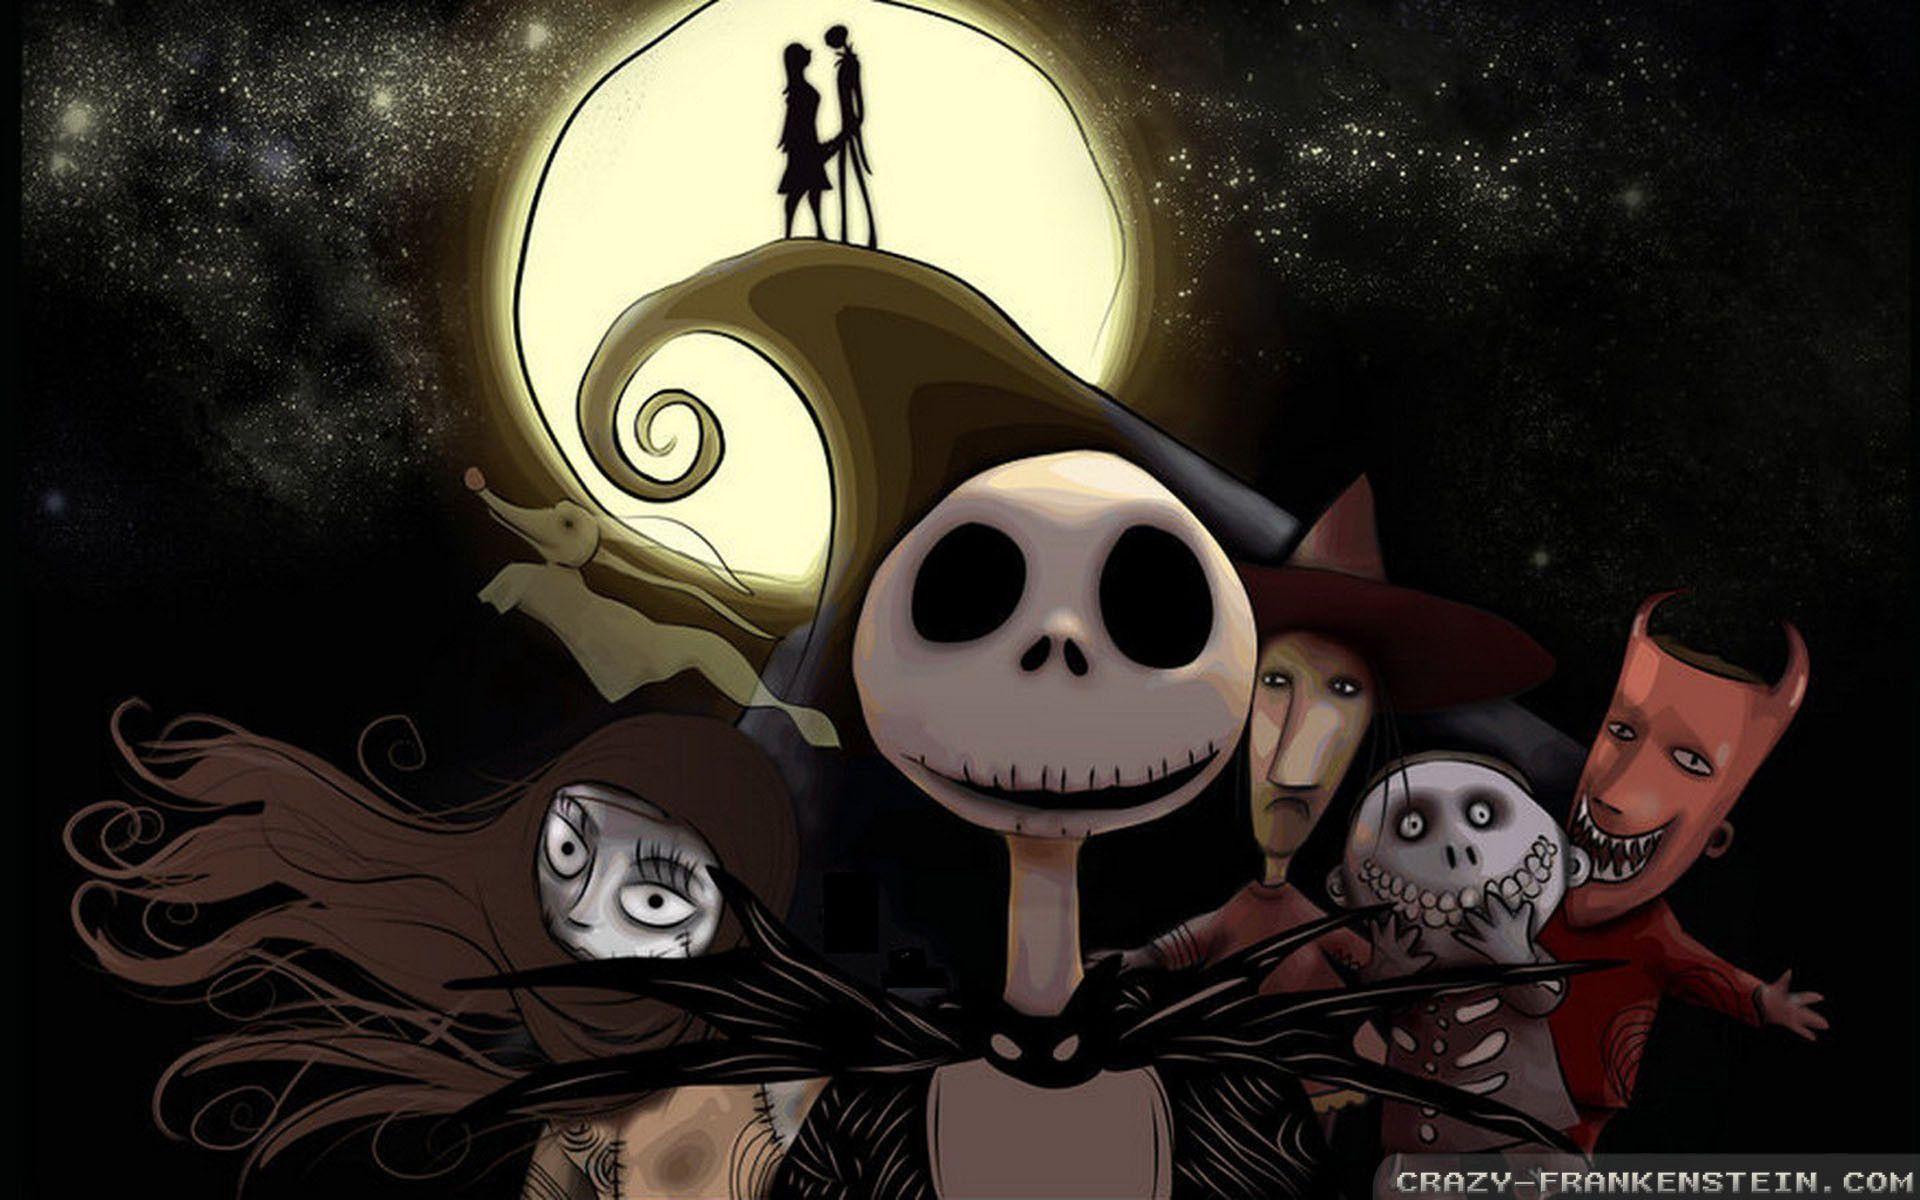 Download Free The Nightmare Before Christmas Wallpaper 1920x1200